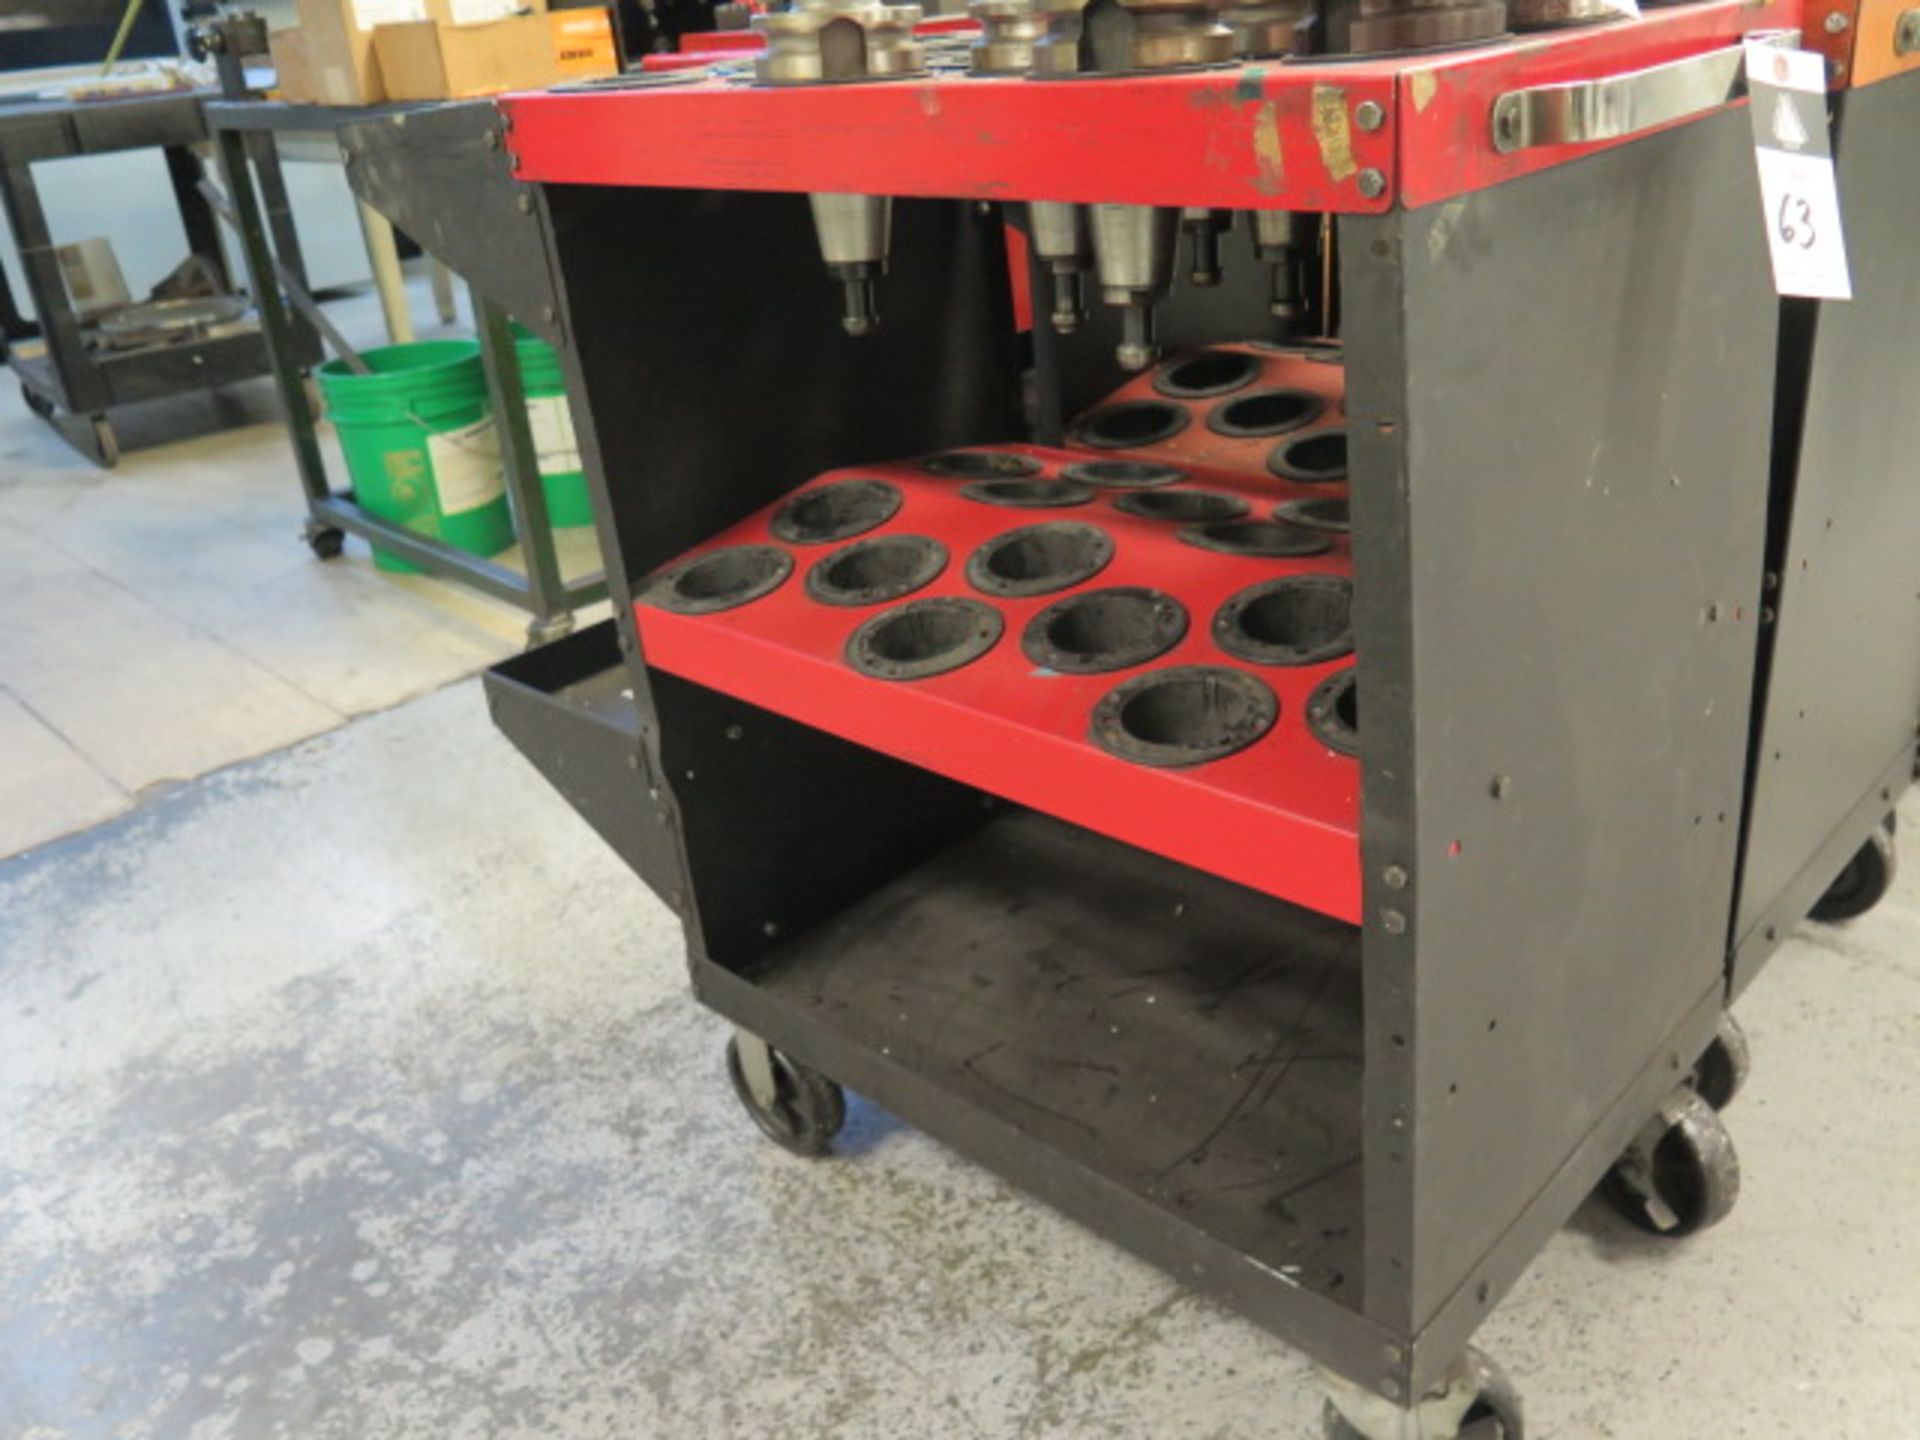 Huot Toolscoot 50-Taper Tooling Cart (SOLD AS-IS - NO WARRANTY) (Located @ 2229 Ringwood Ave. San Jo